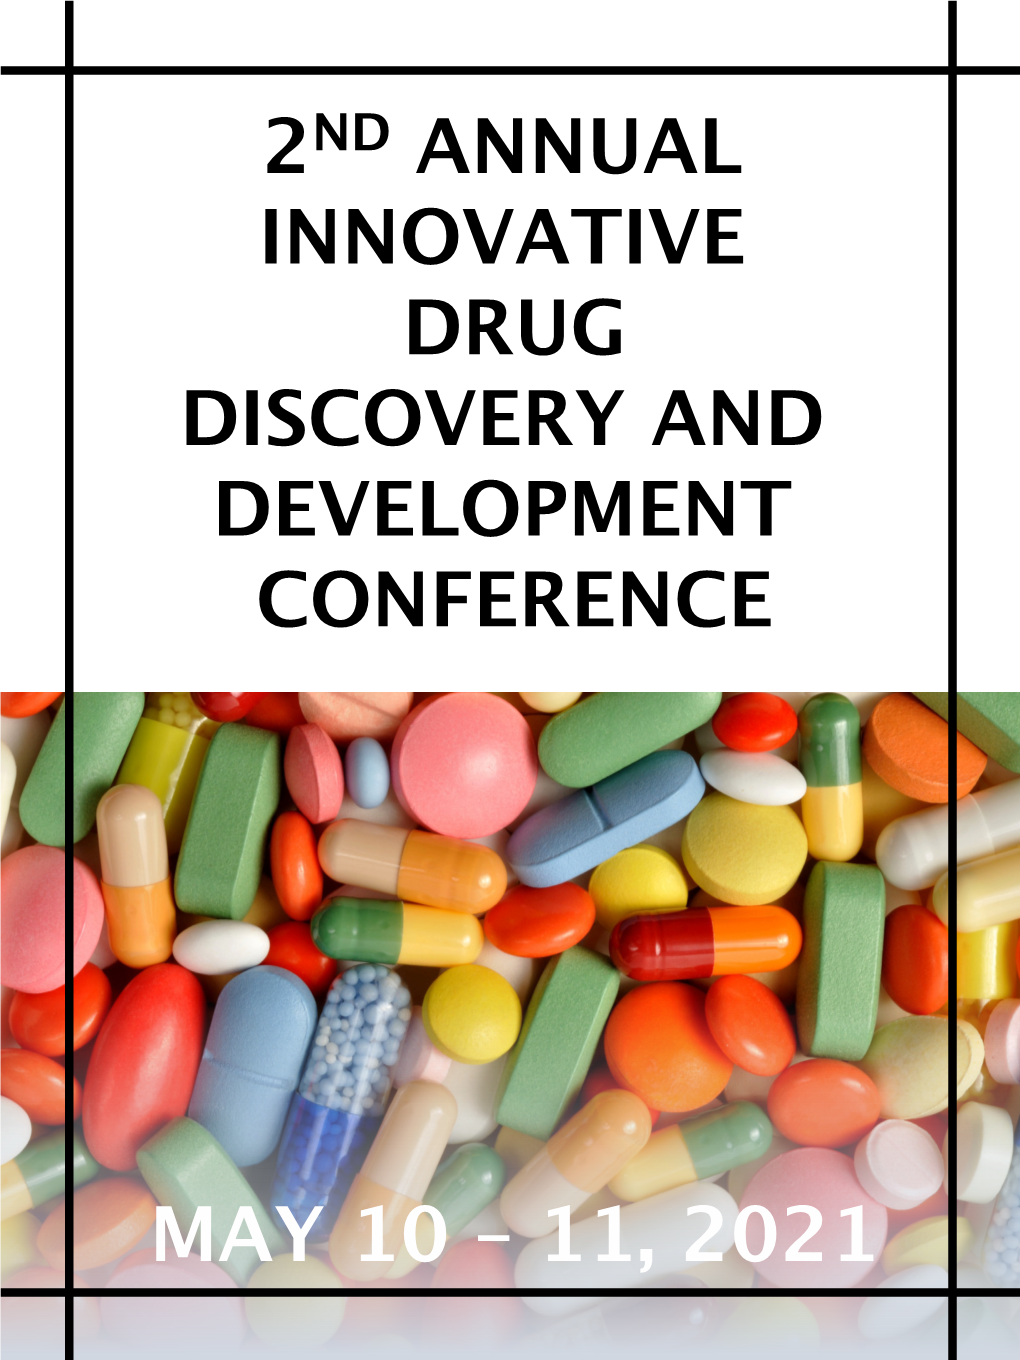 2Nd Annual Innovative Drug Discovery and Development Conference